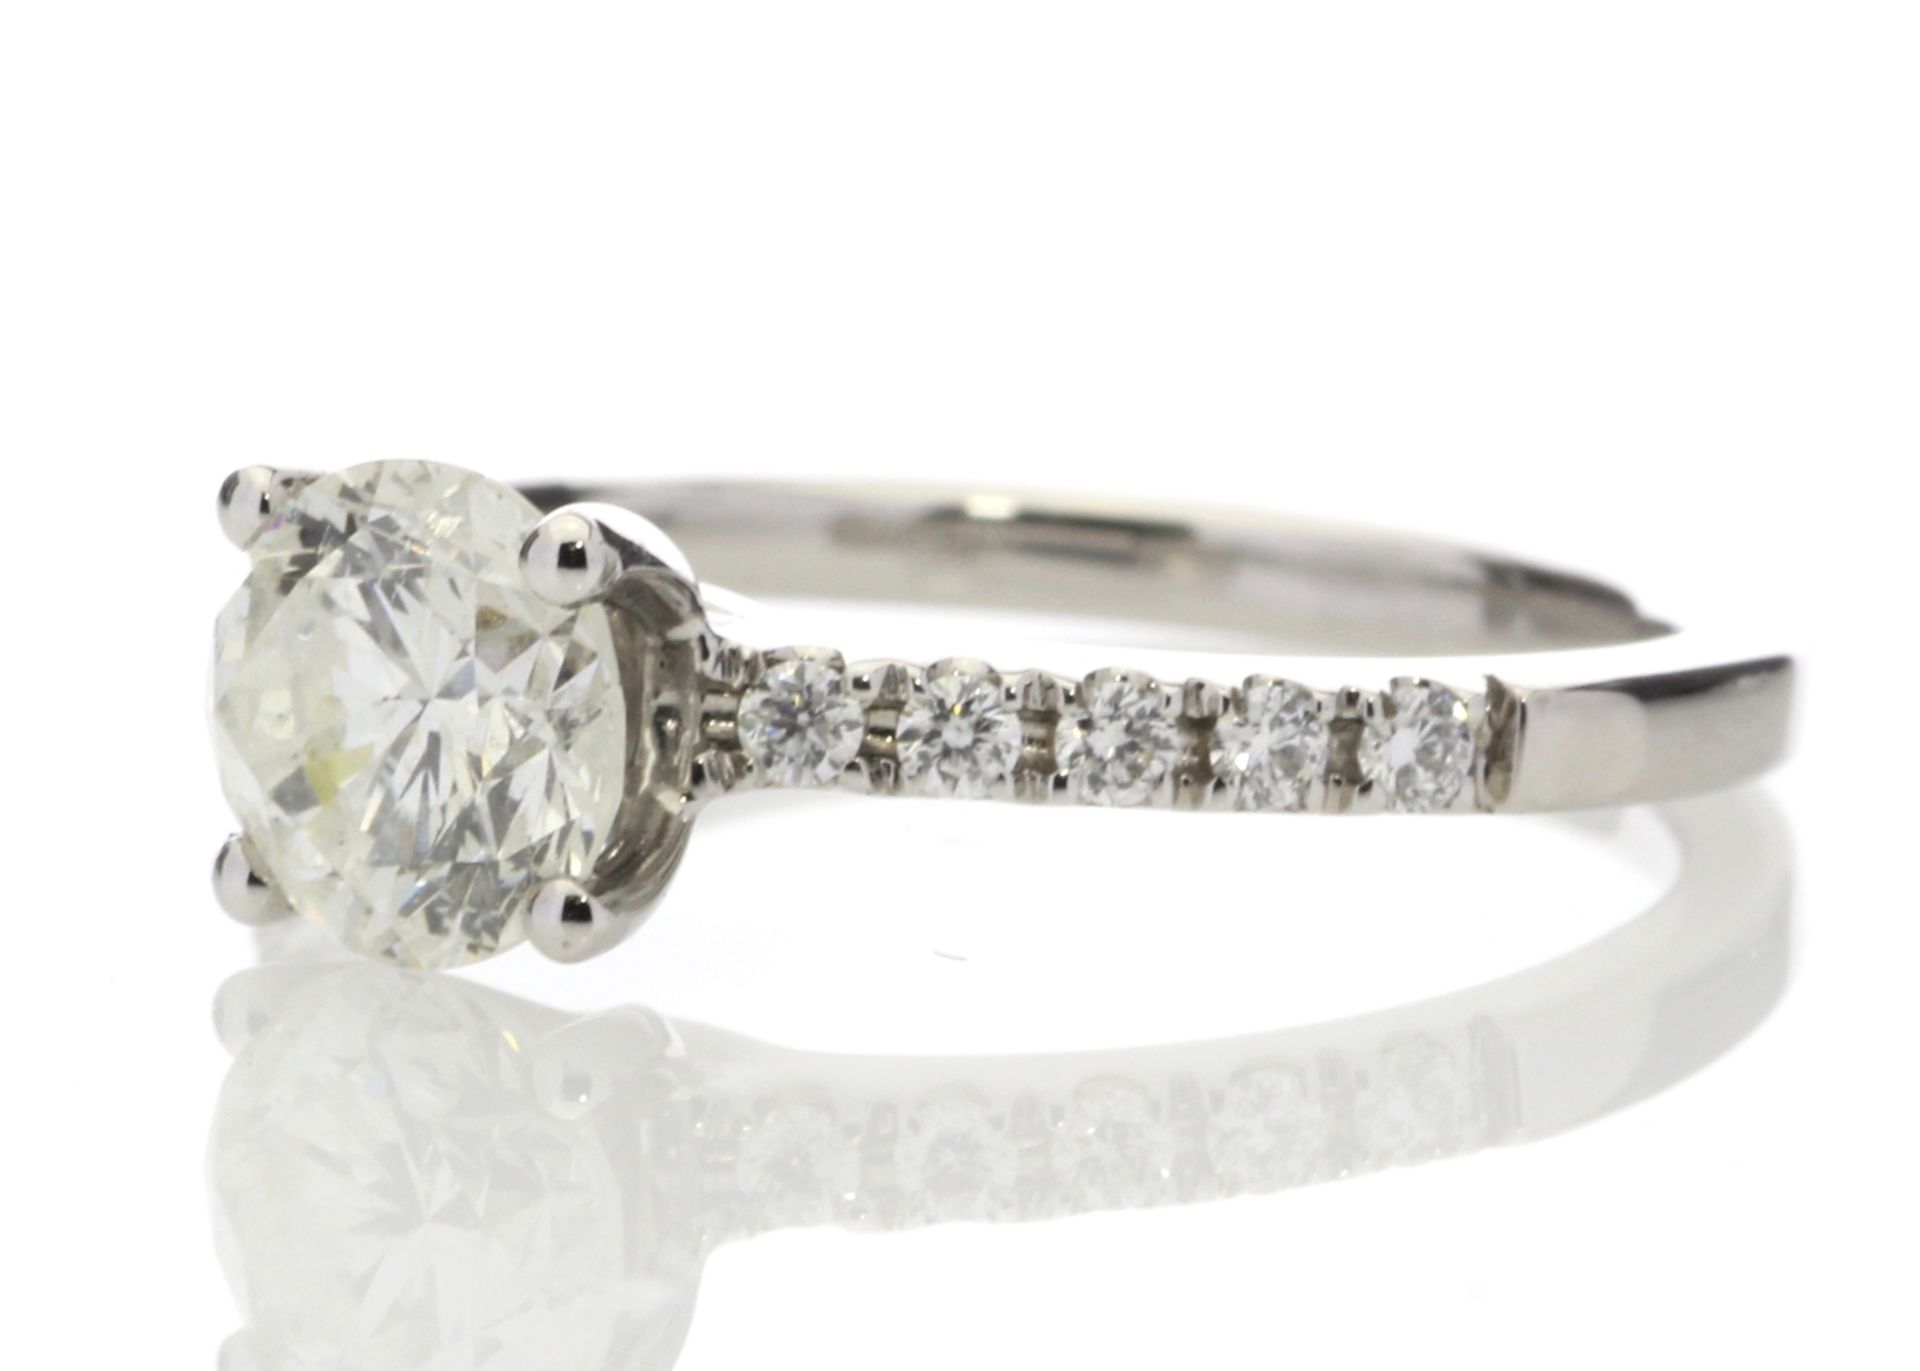 18ct White Gold Single Stone Diamond Ring With Stone Set Shoulders (1.07) 1.25 Carats - Image 2 of 5